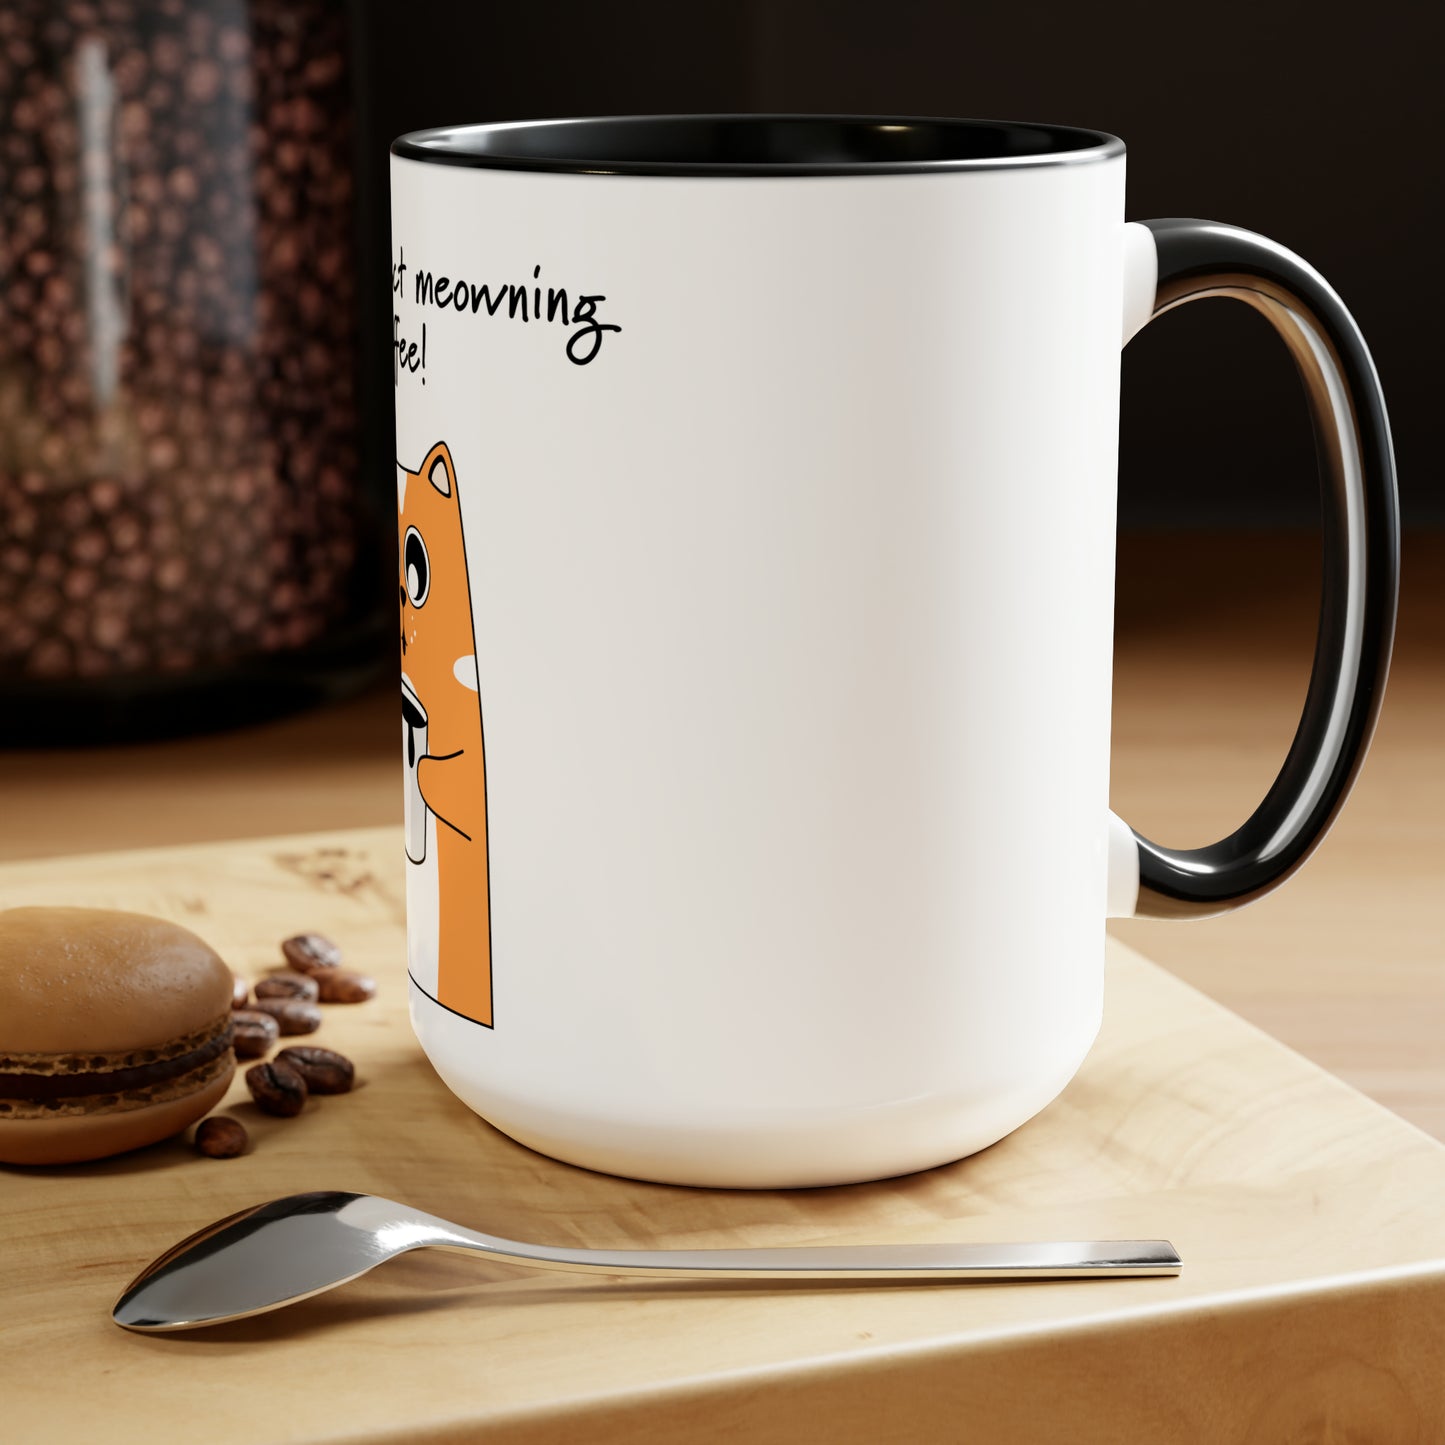 Cat with a cup of coffee, Two-Tone Coffee Mugs, 15oz